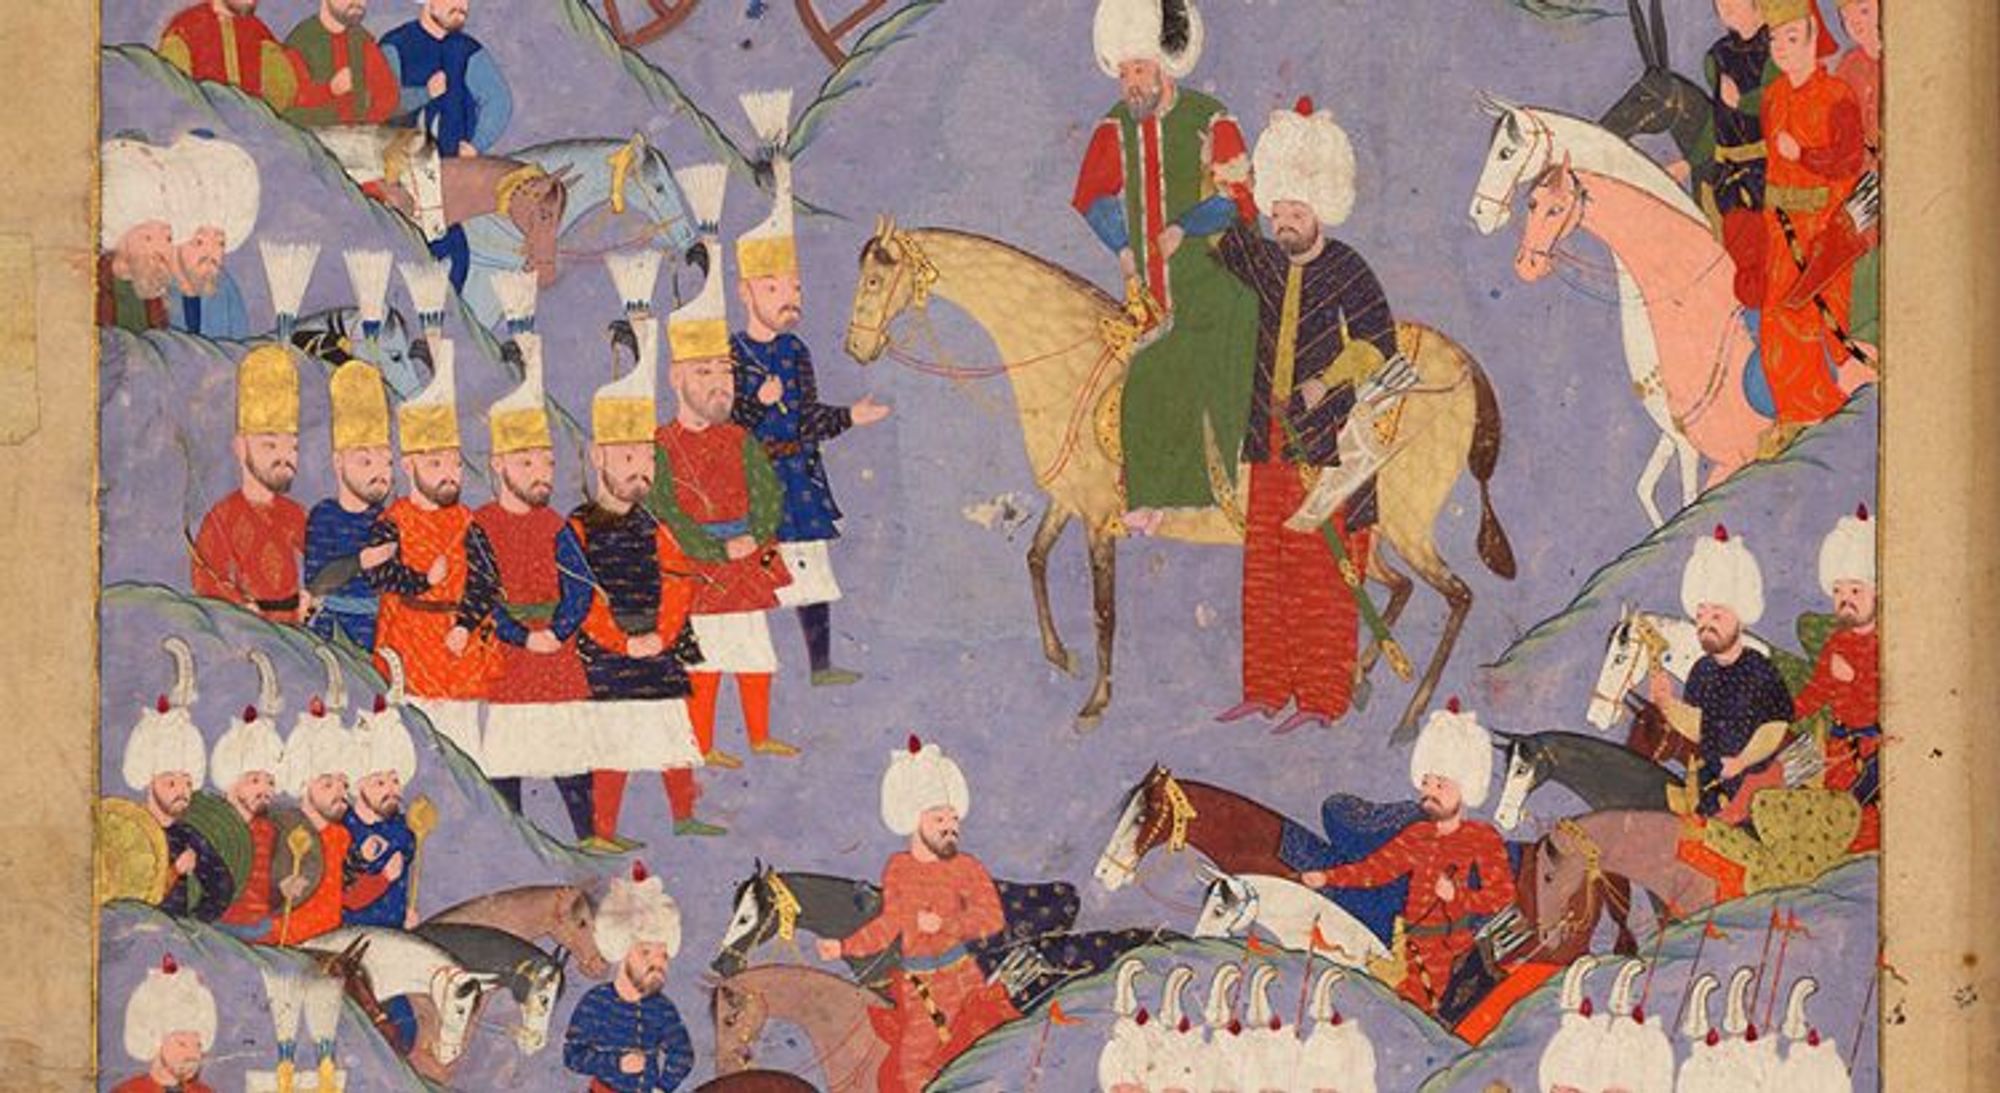 16 century painted manuscript of a battle led by Sultan Suleyman.